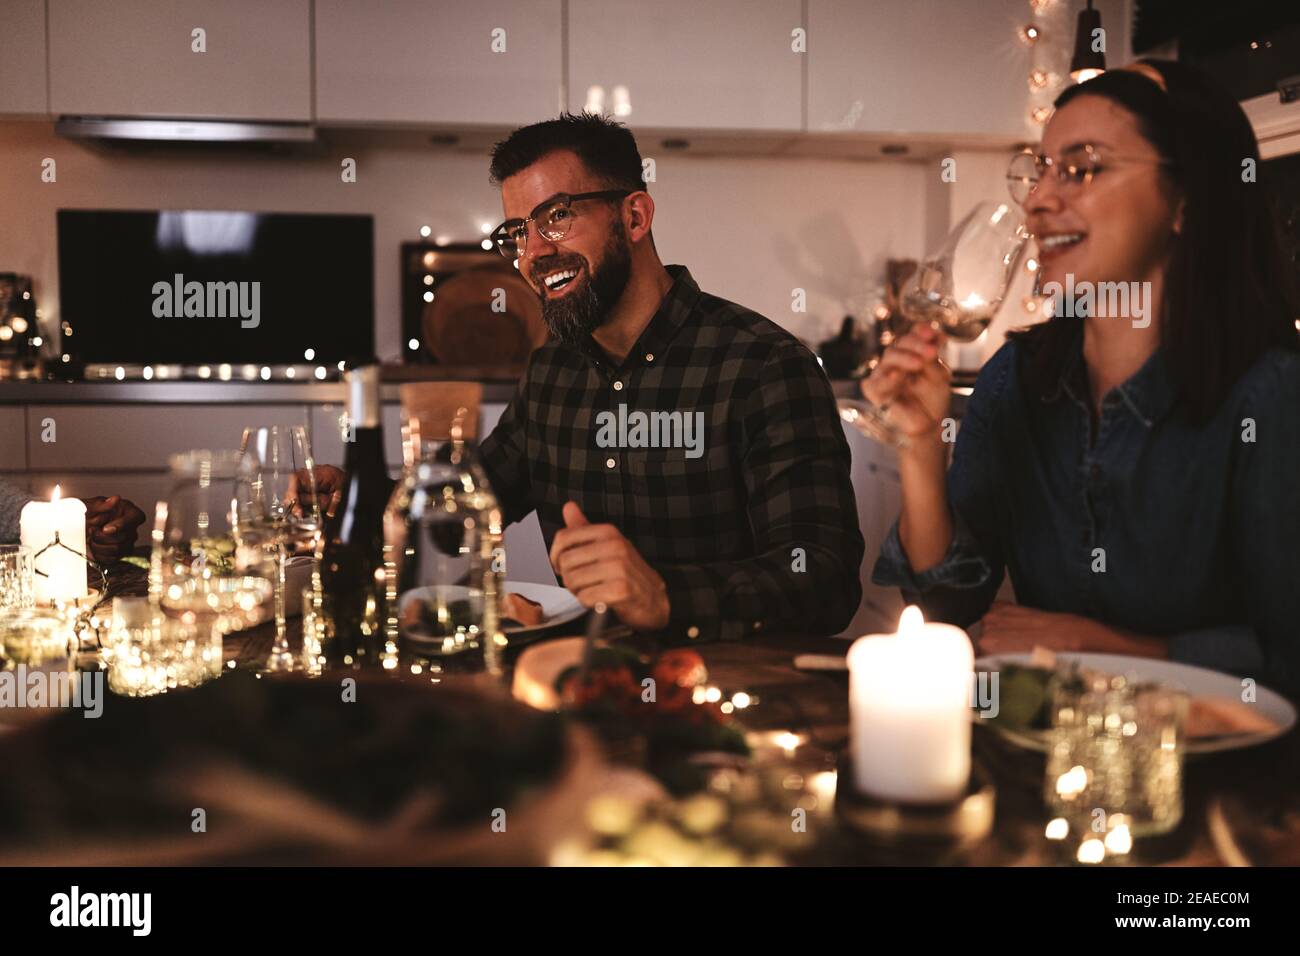 Friends laughing together over glasses of wine while sitting around a table during a candlelit dinner Stock Photo